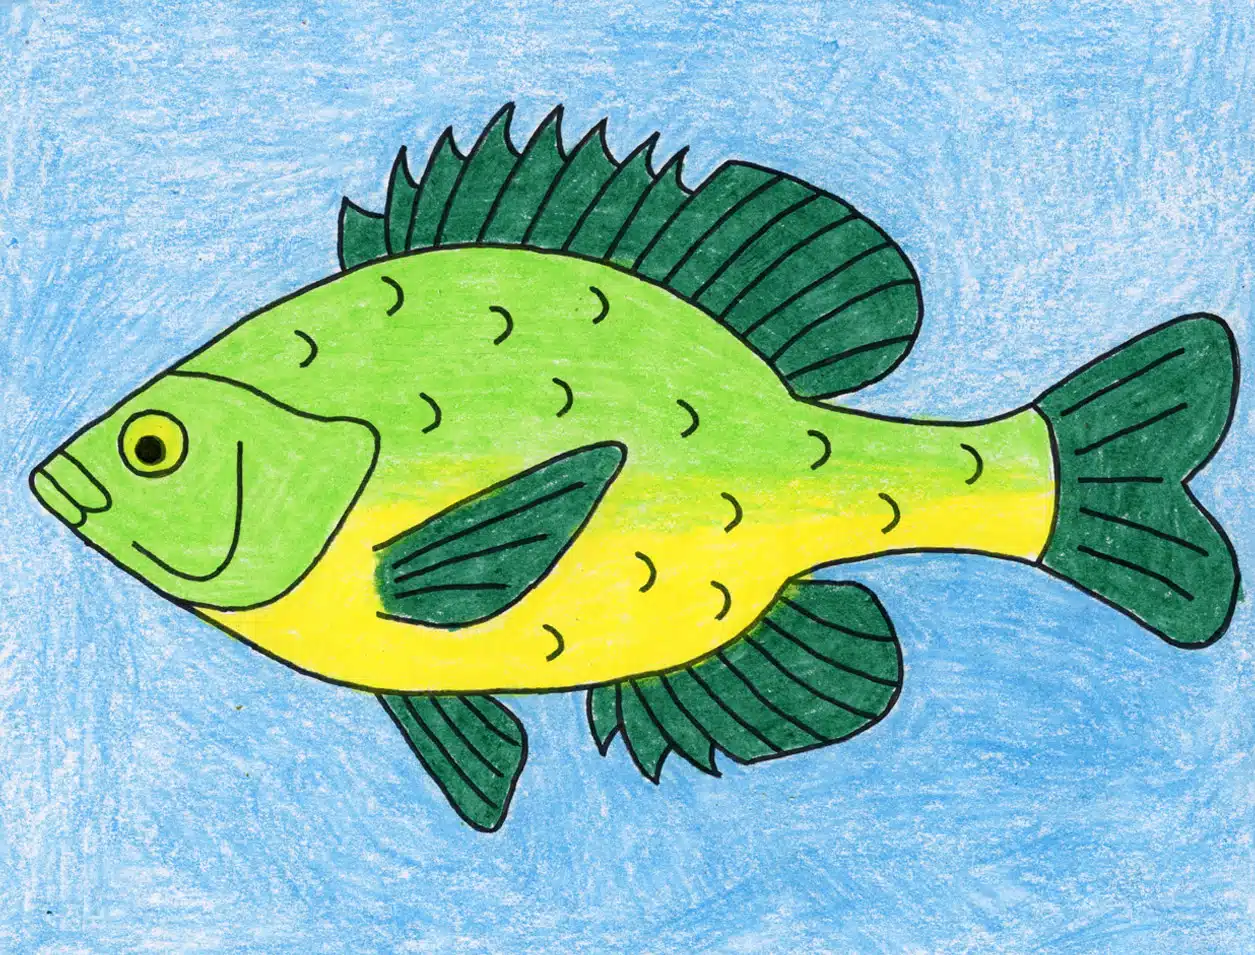 Easy How to Draw a Fish Tutorial Video and Fish Coloring Page